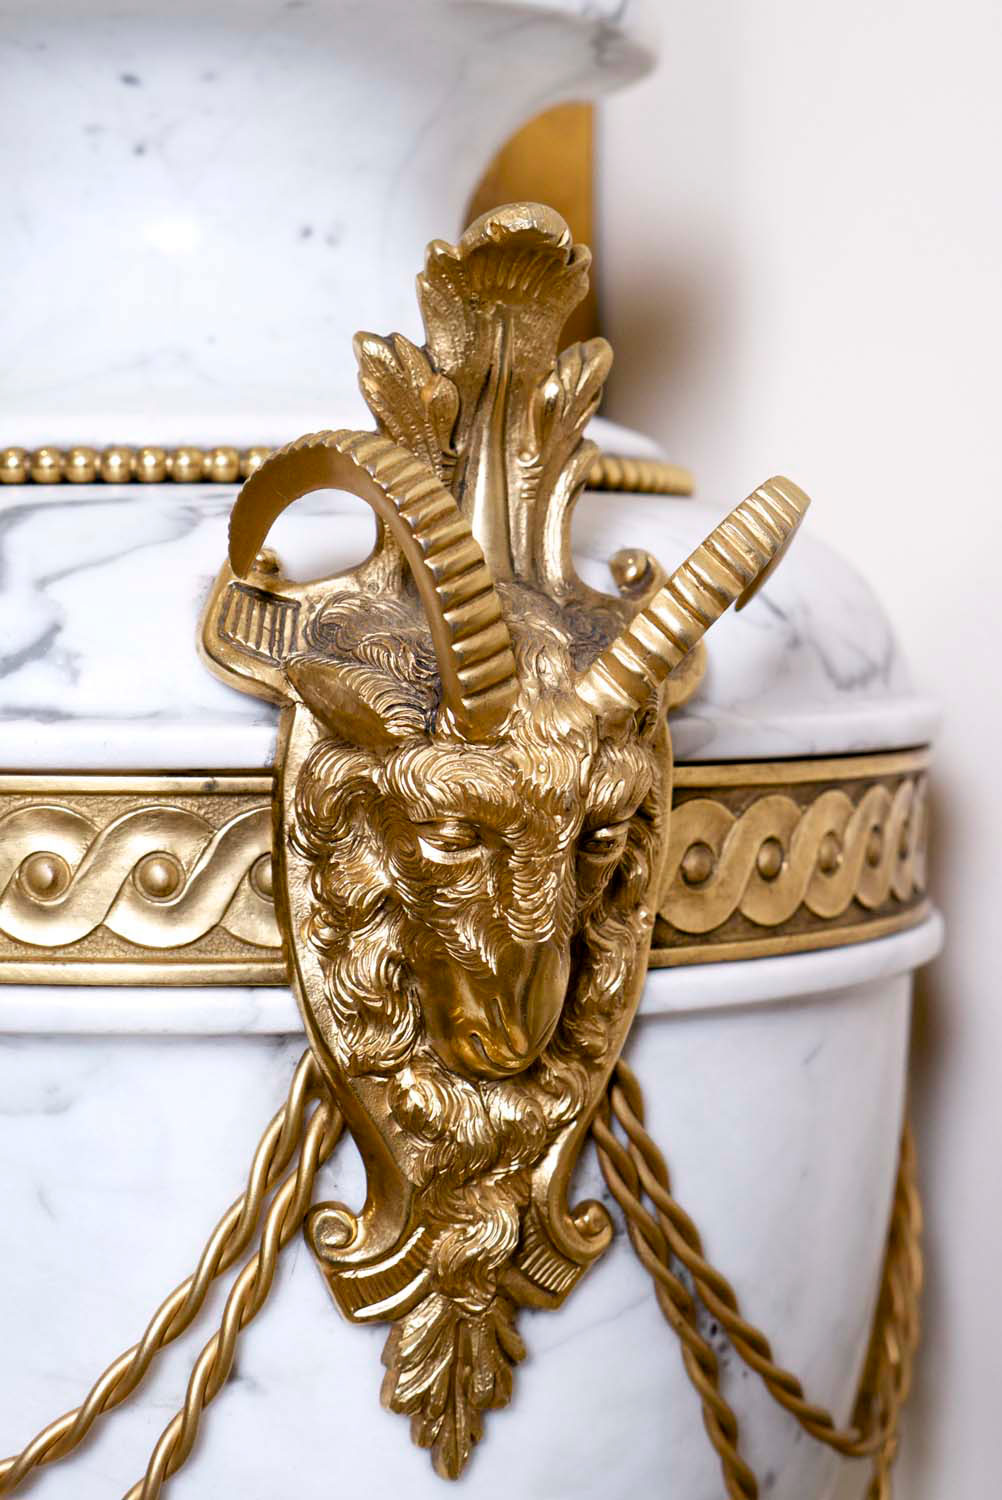 4 Gilding detail on french décor urn with deocrative motif positoned in hall way